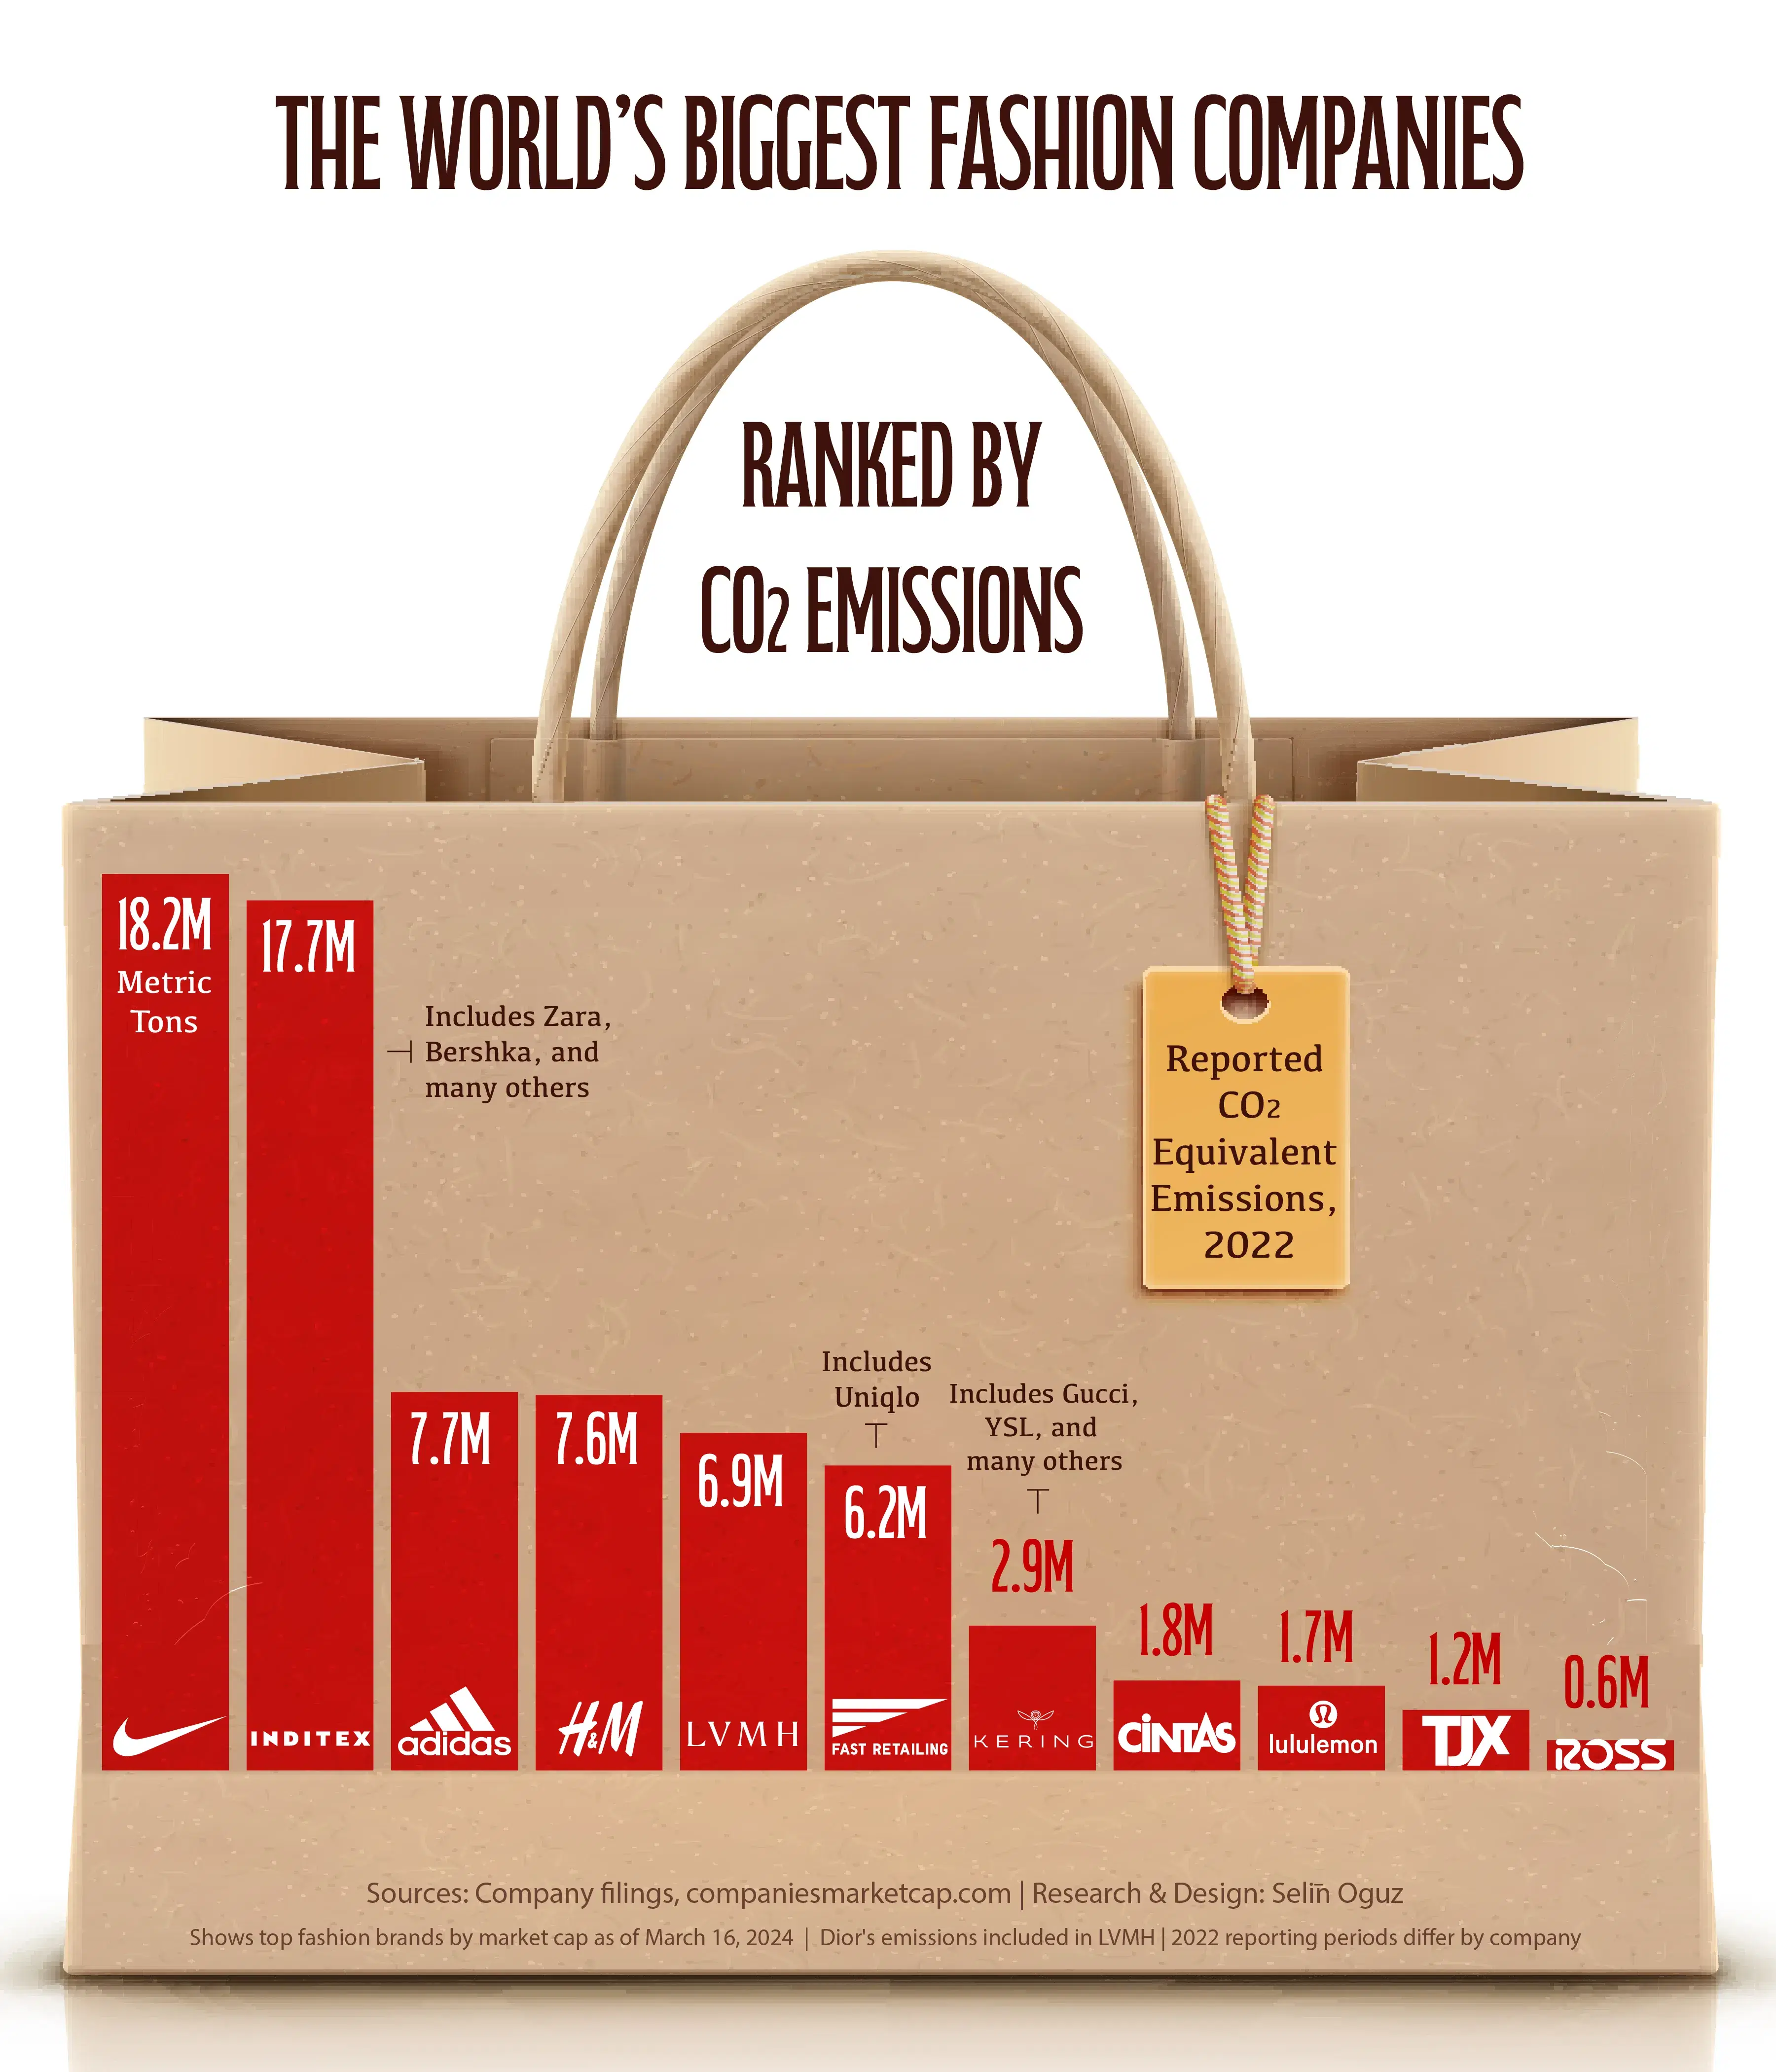 CO2 Emissions of the World's Biggest Fashion Companies